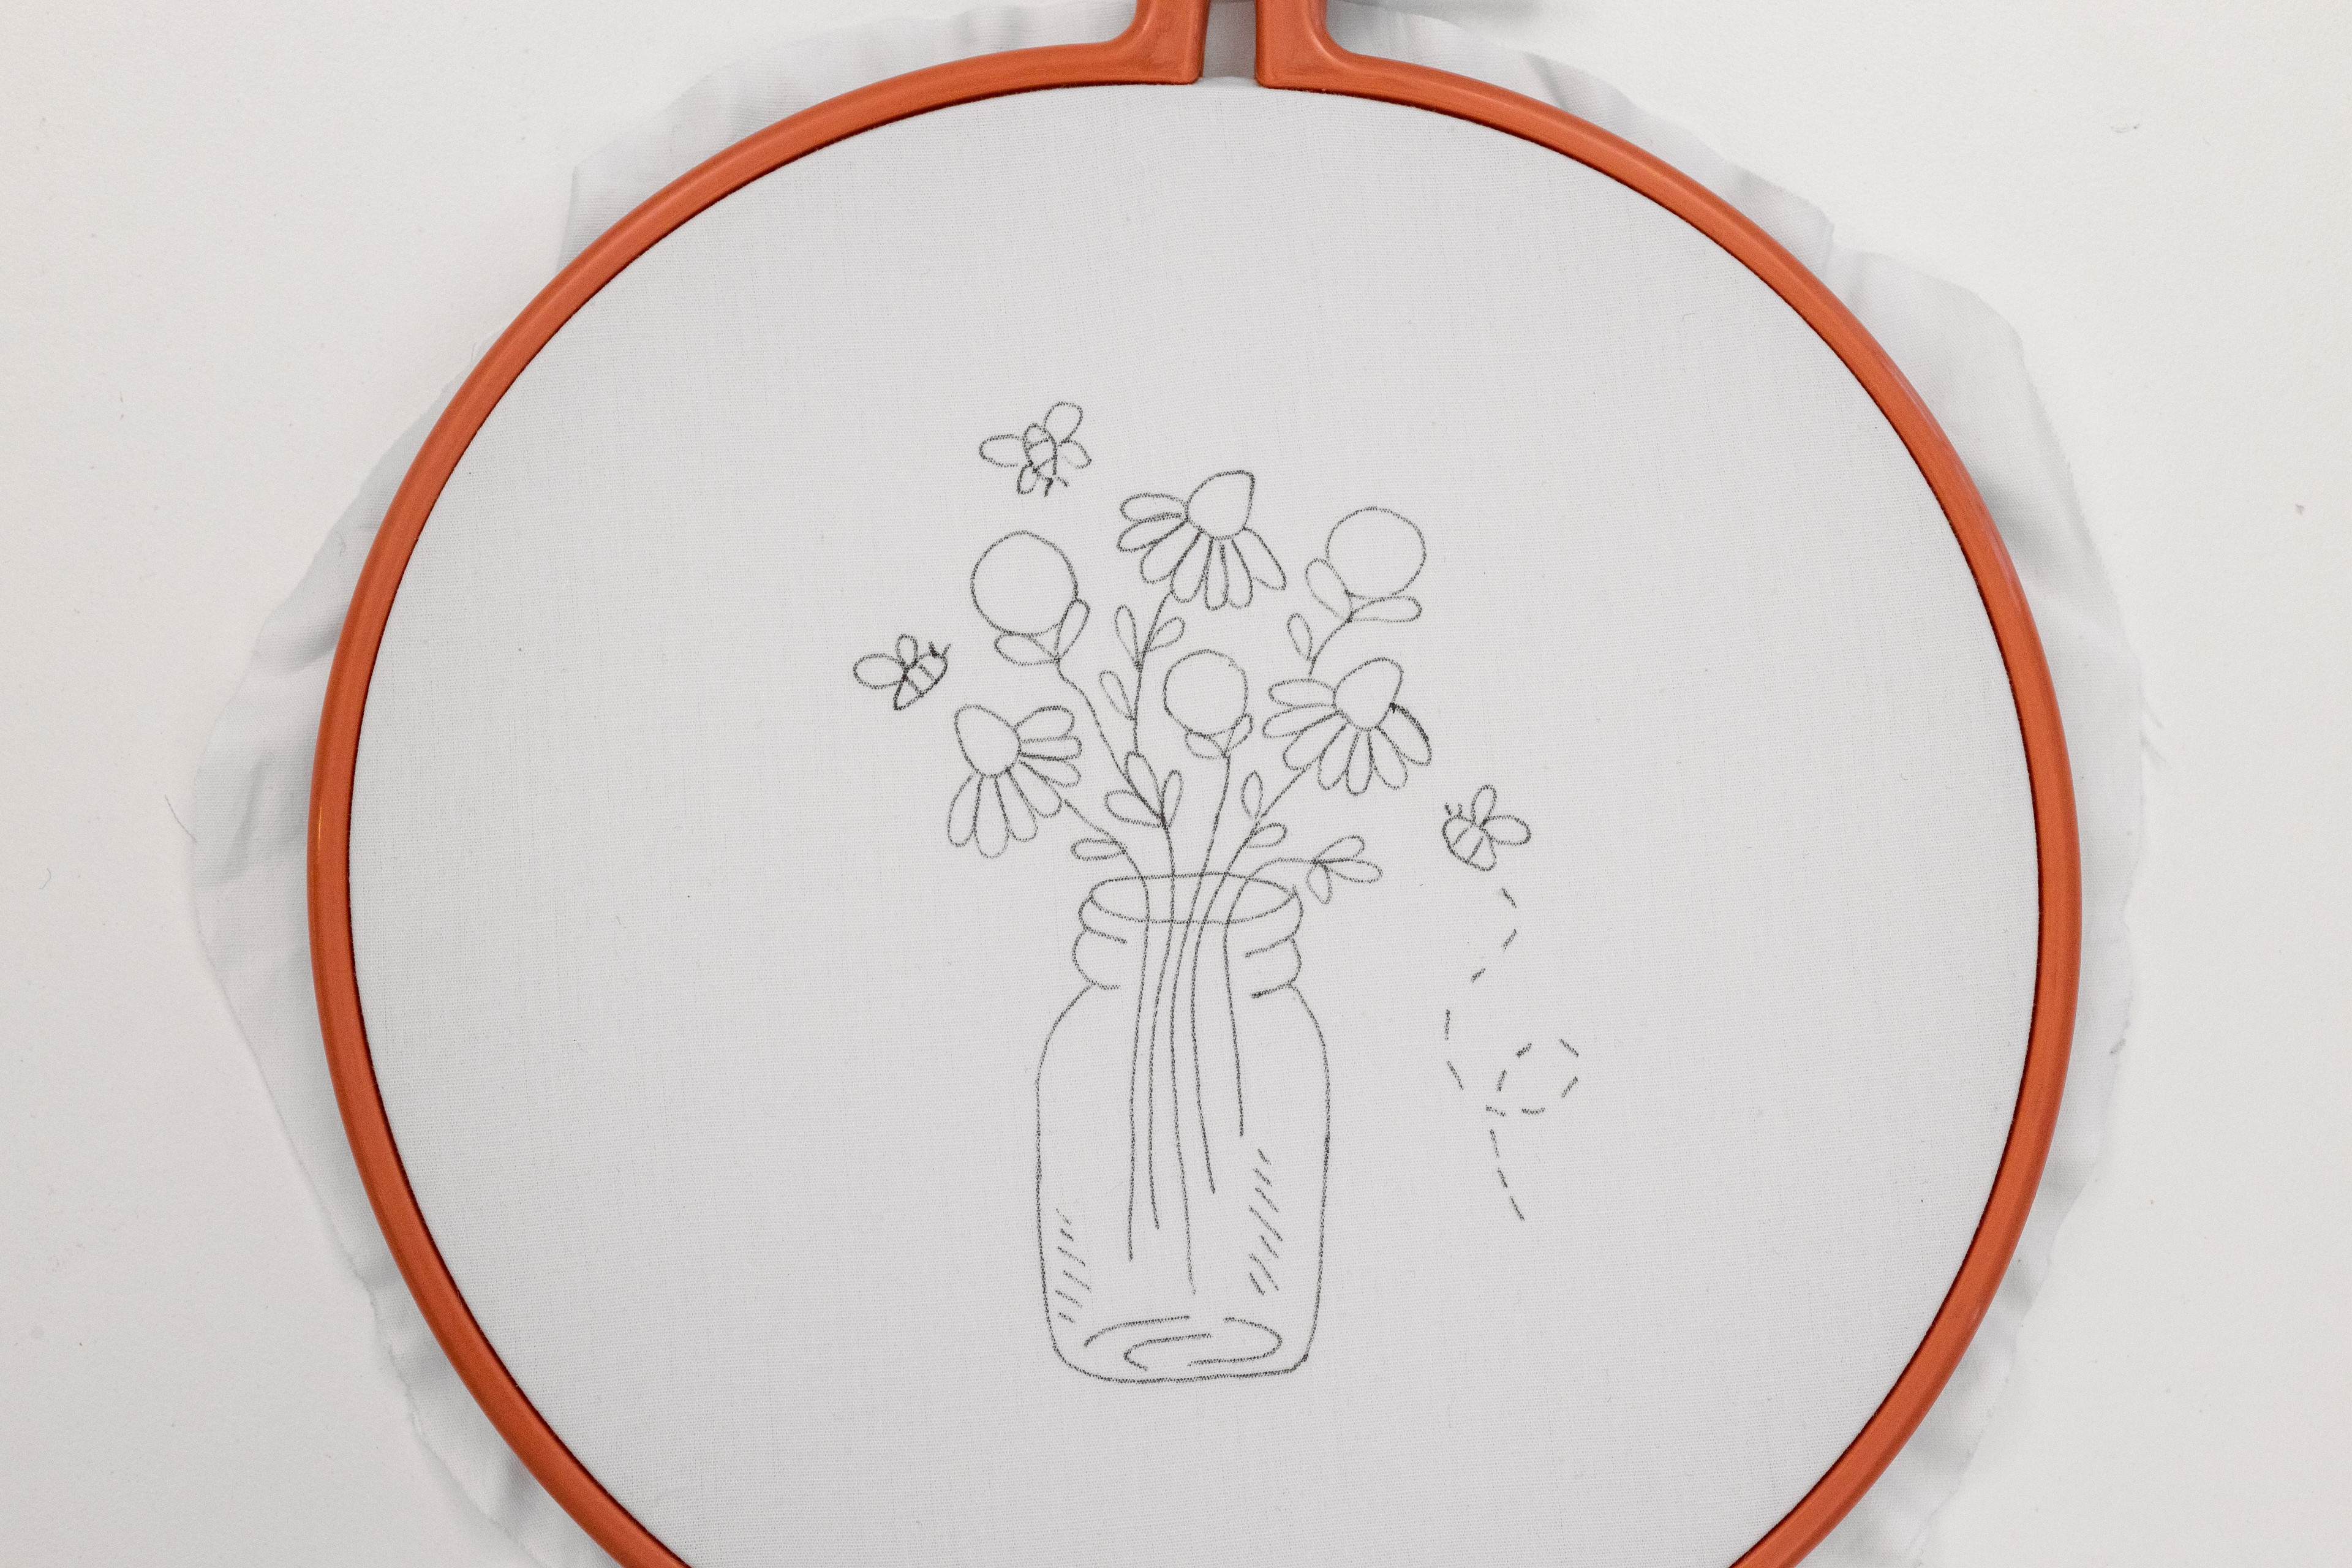 A floral vase pattern is drawn on the fabric.